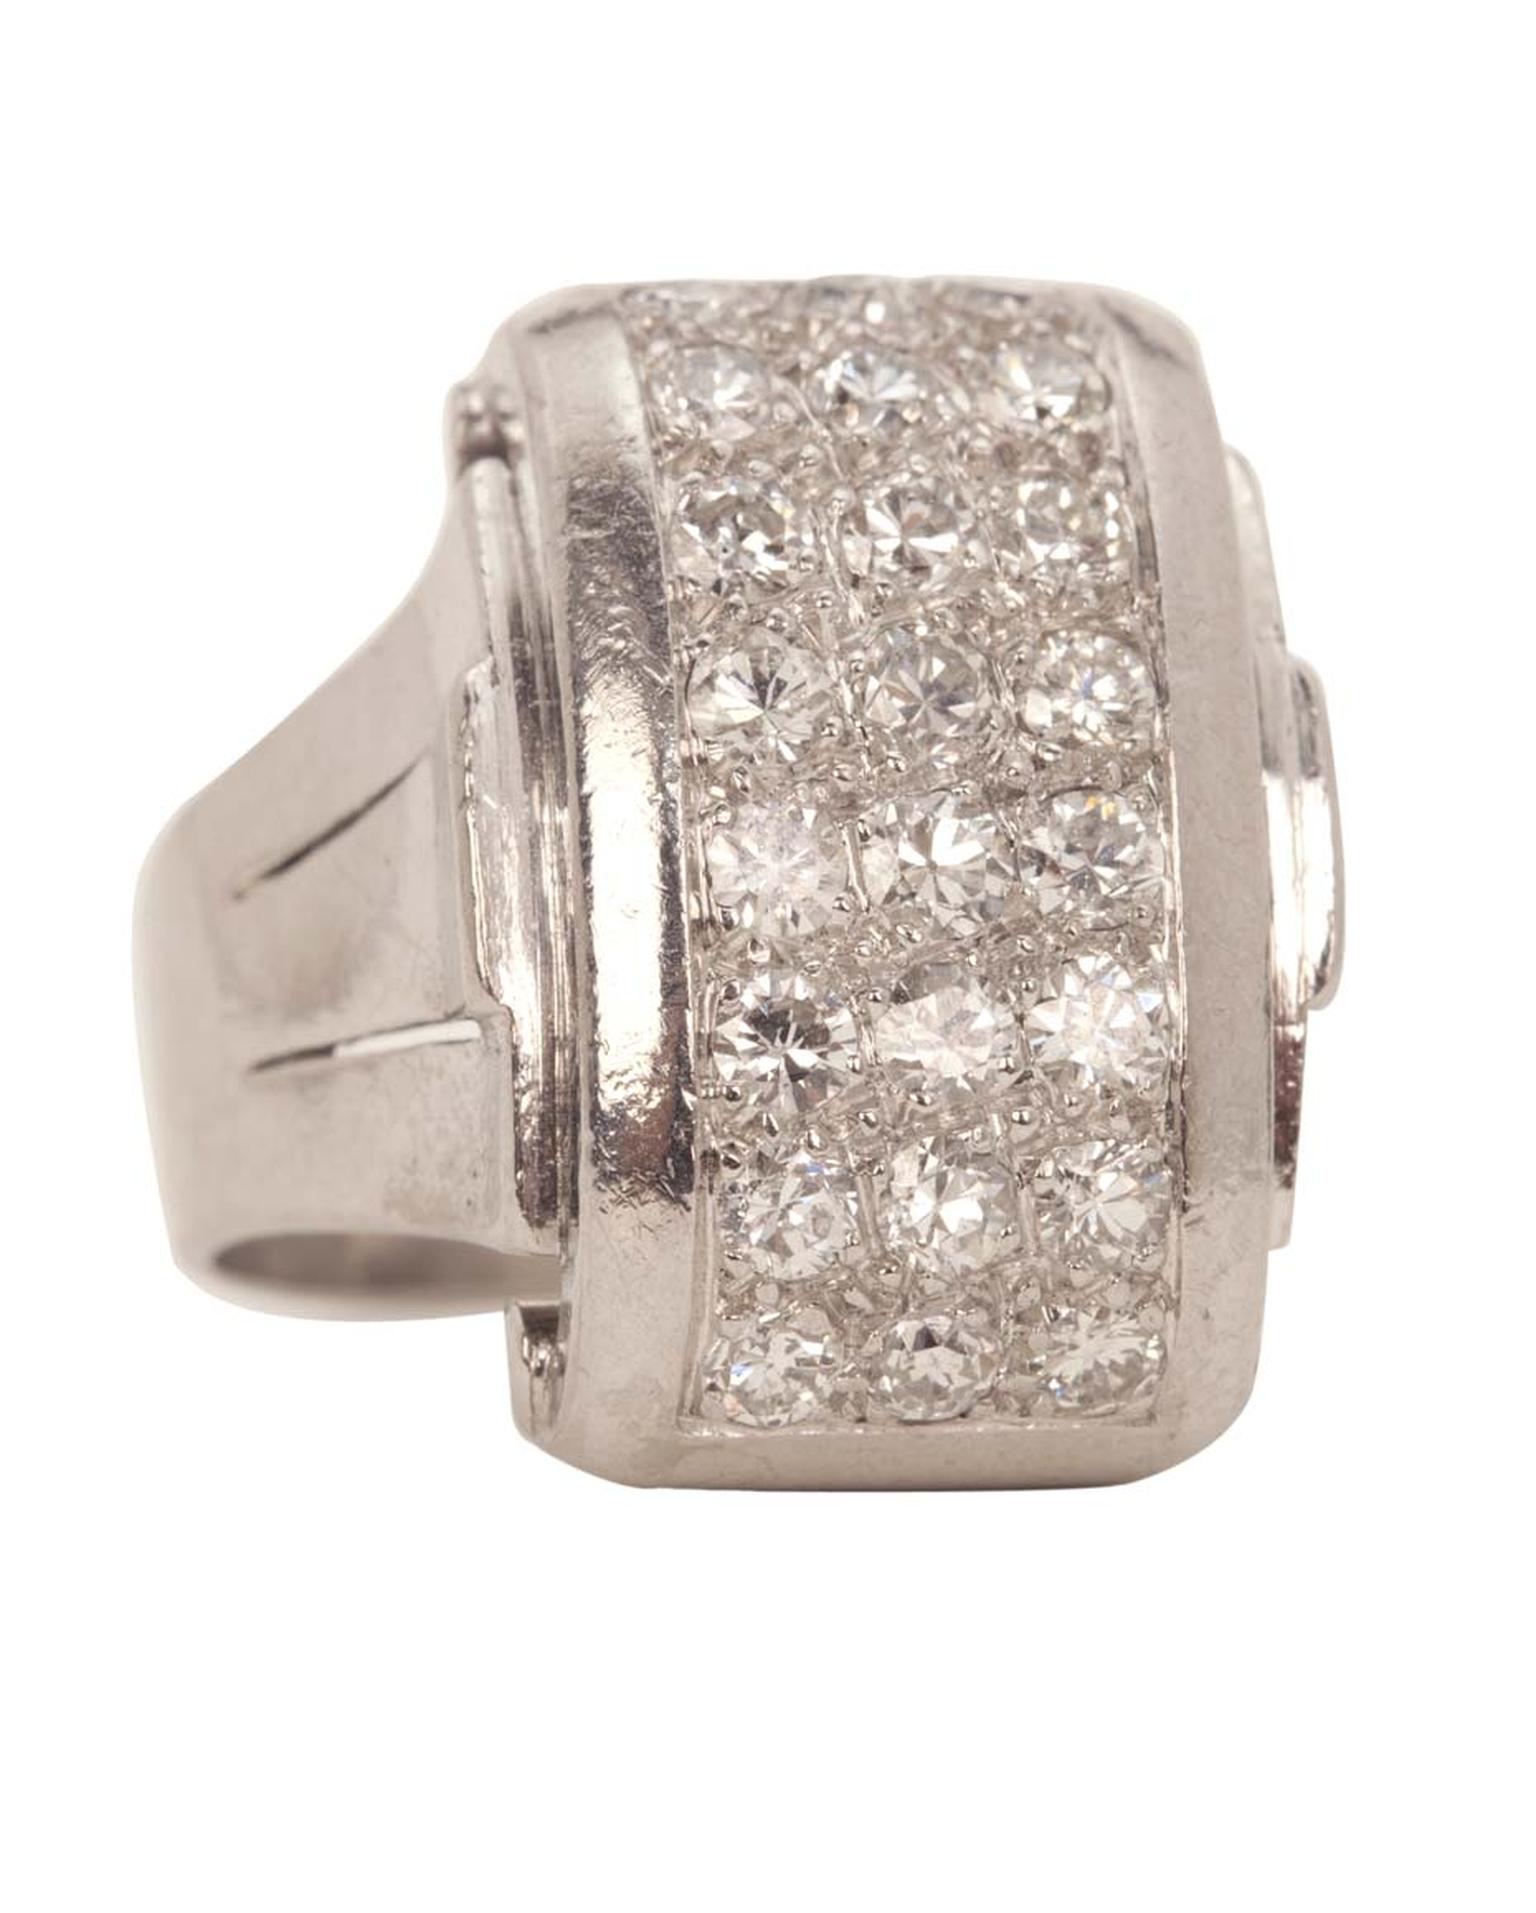 René Boivin Art Deco white gold and platinum ring circa 1935 in an odeonesque style with pavé-set diamonds.